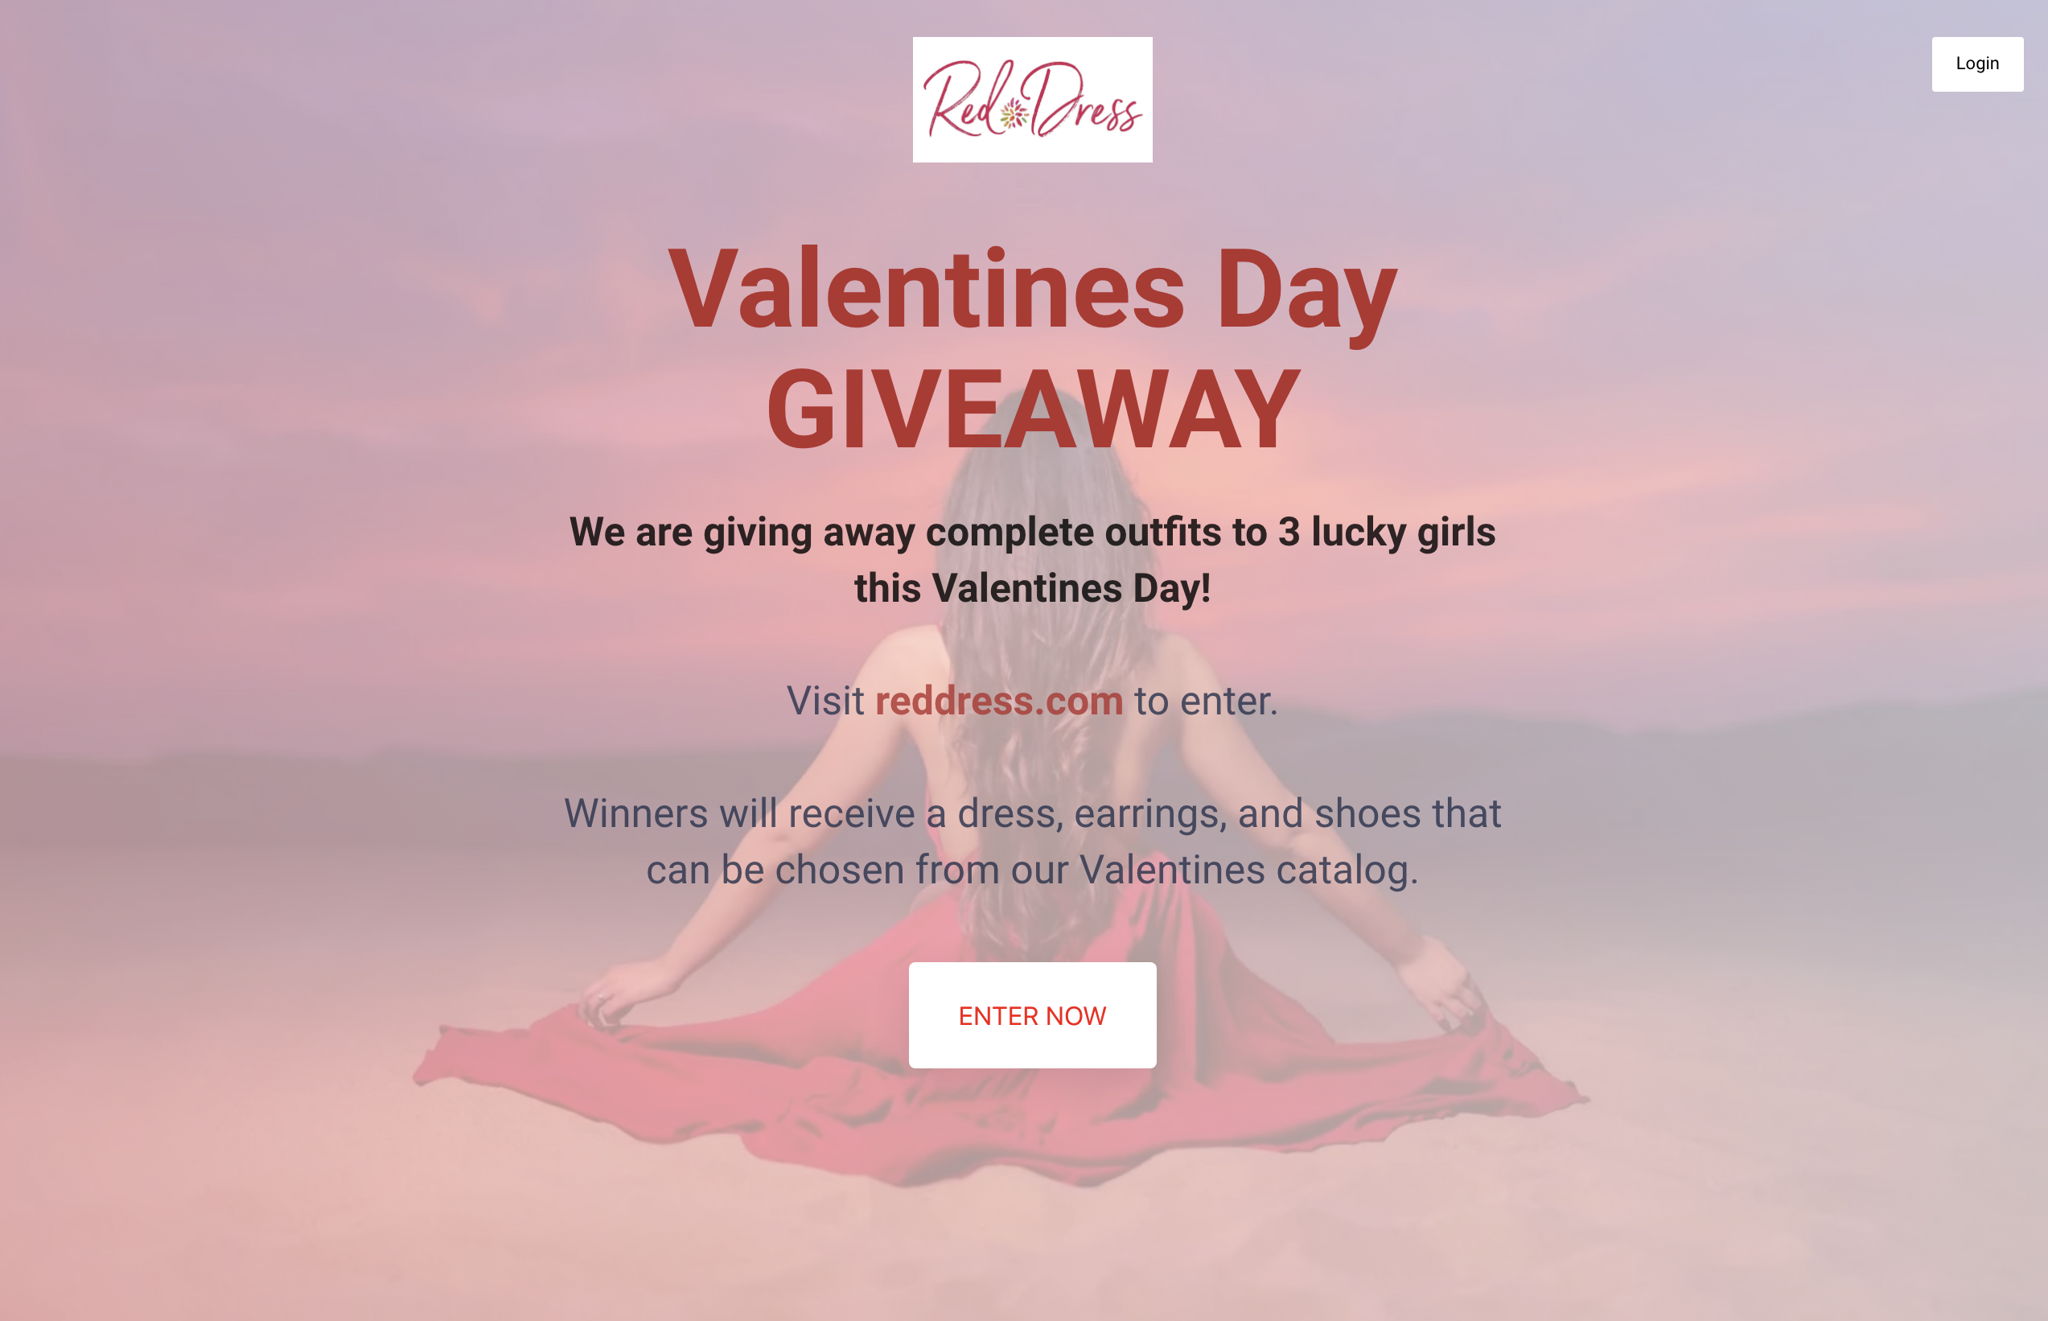 Red Dress Valentines Day Giveaway